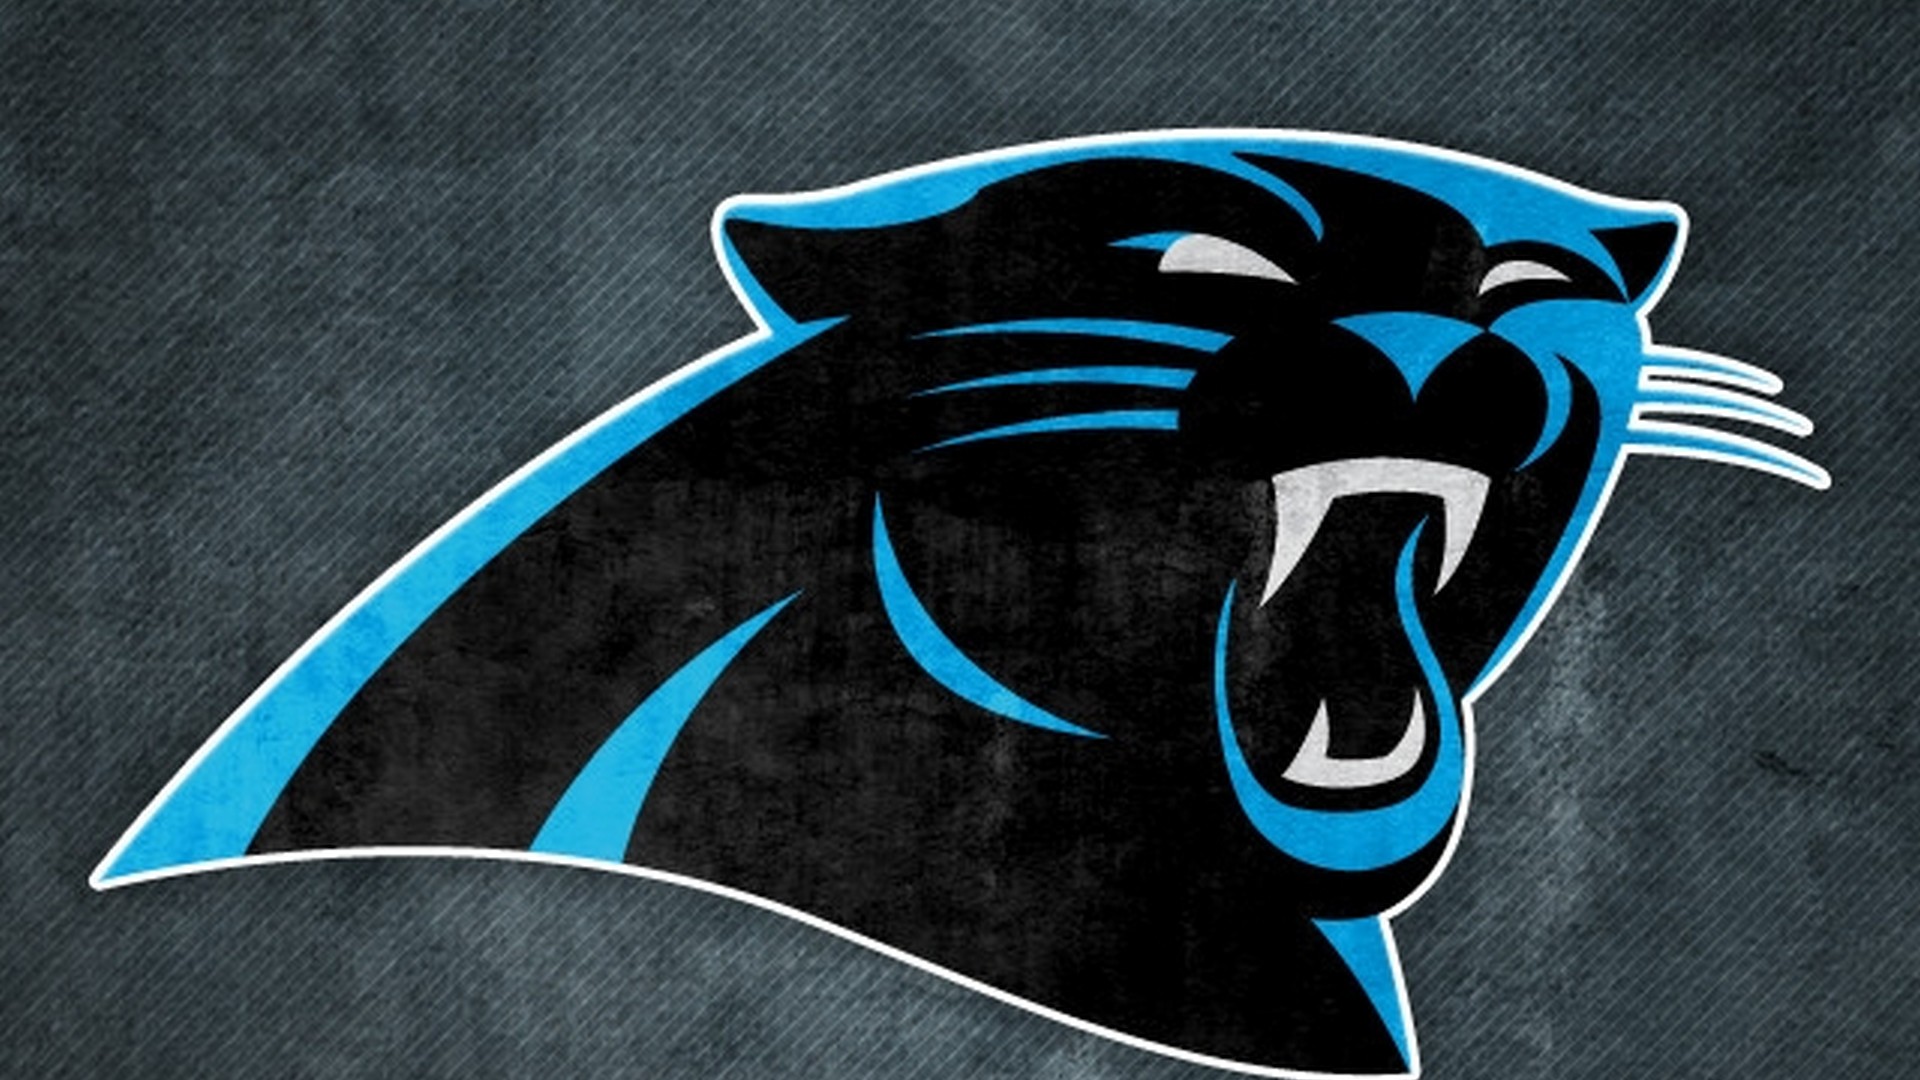 Panthers Wallpaper HD with high-resolution 1920x1080 pixel. You can use this wallpaper for your Mac or Windows Desktop Background, iPhone, Android or Tablet and another Smartphone device